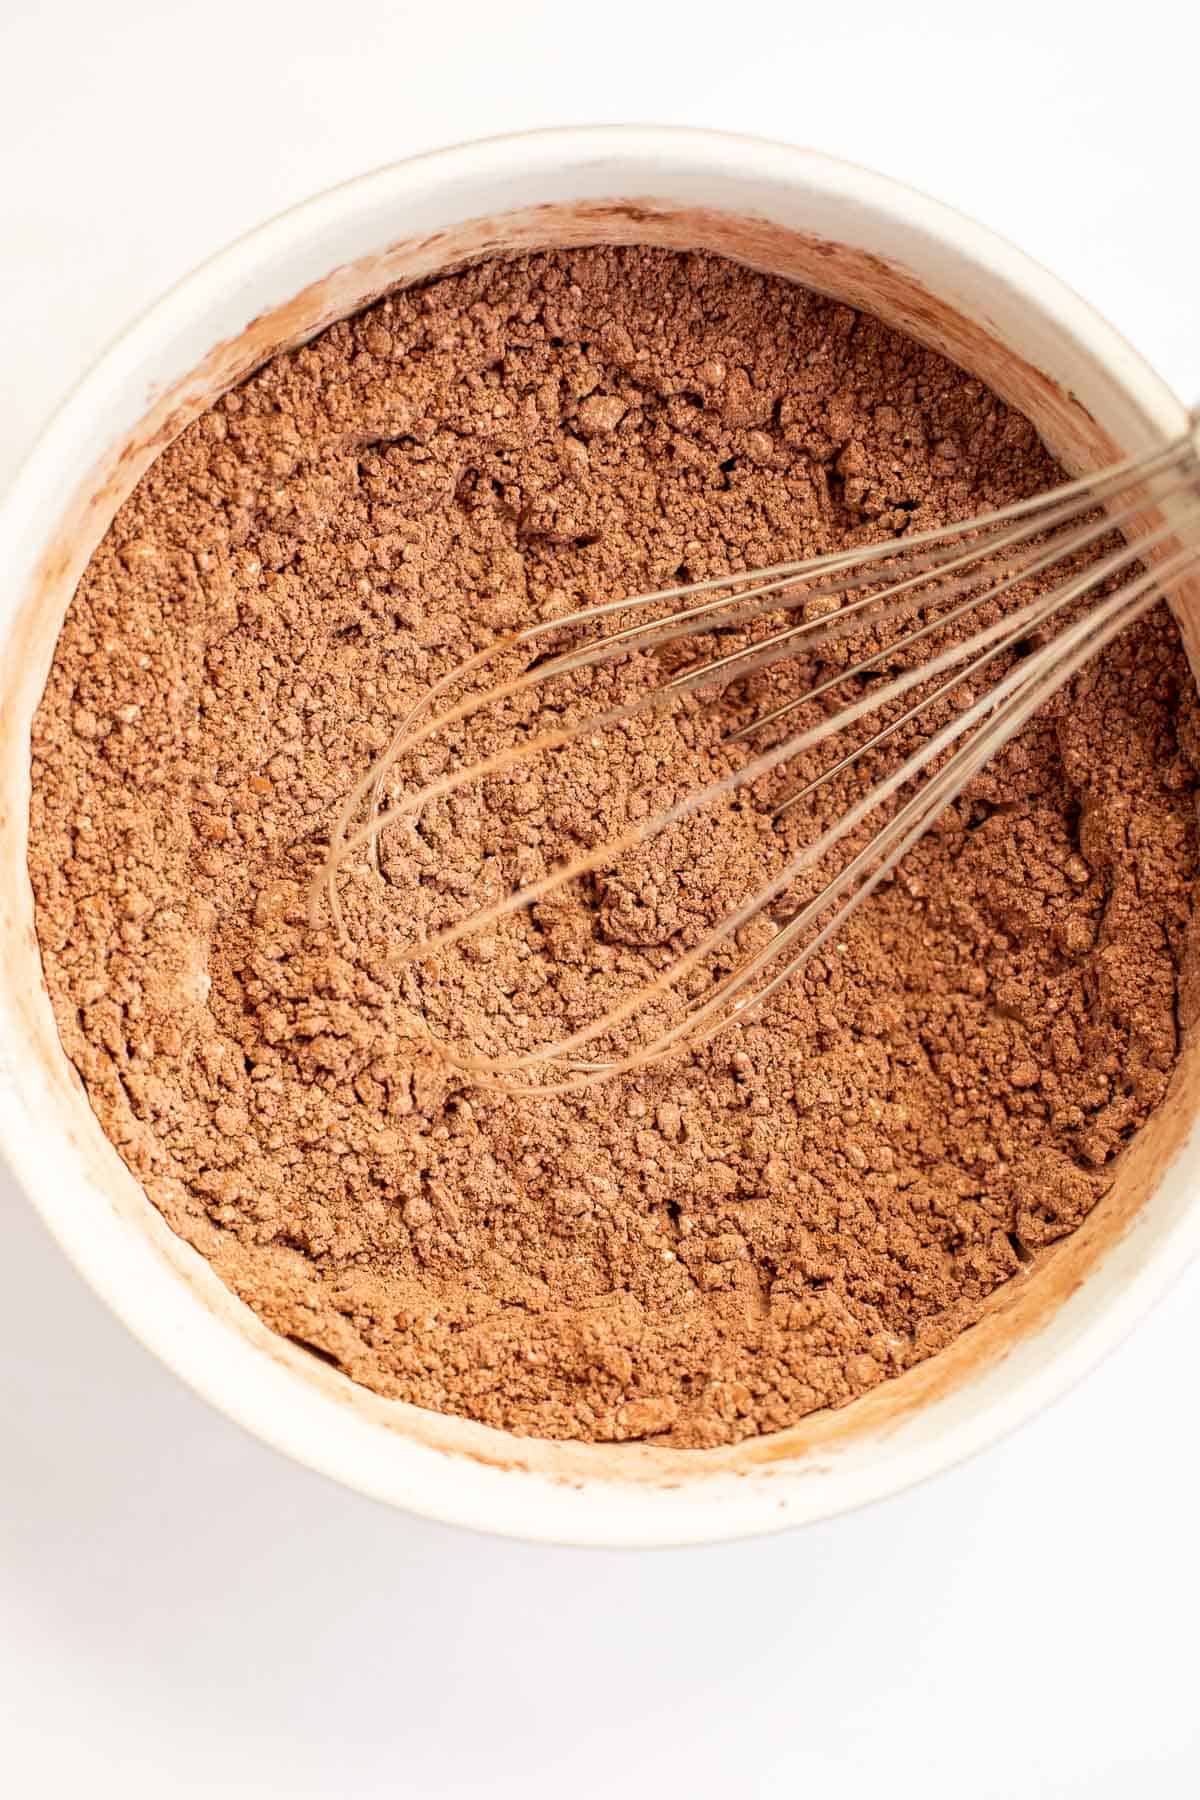 powdered sugar and cocoa powder whisked together in a white bowl.